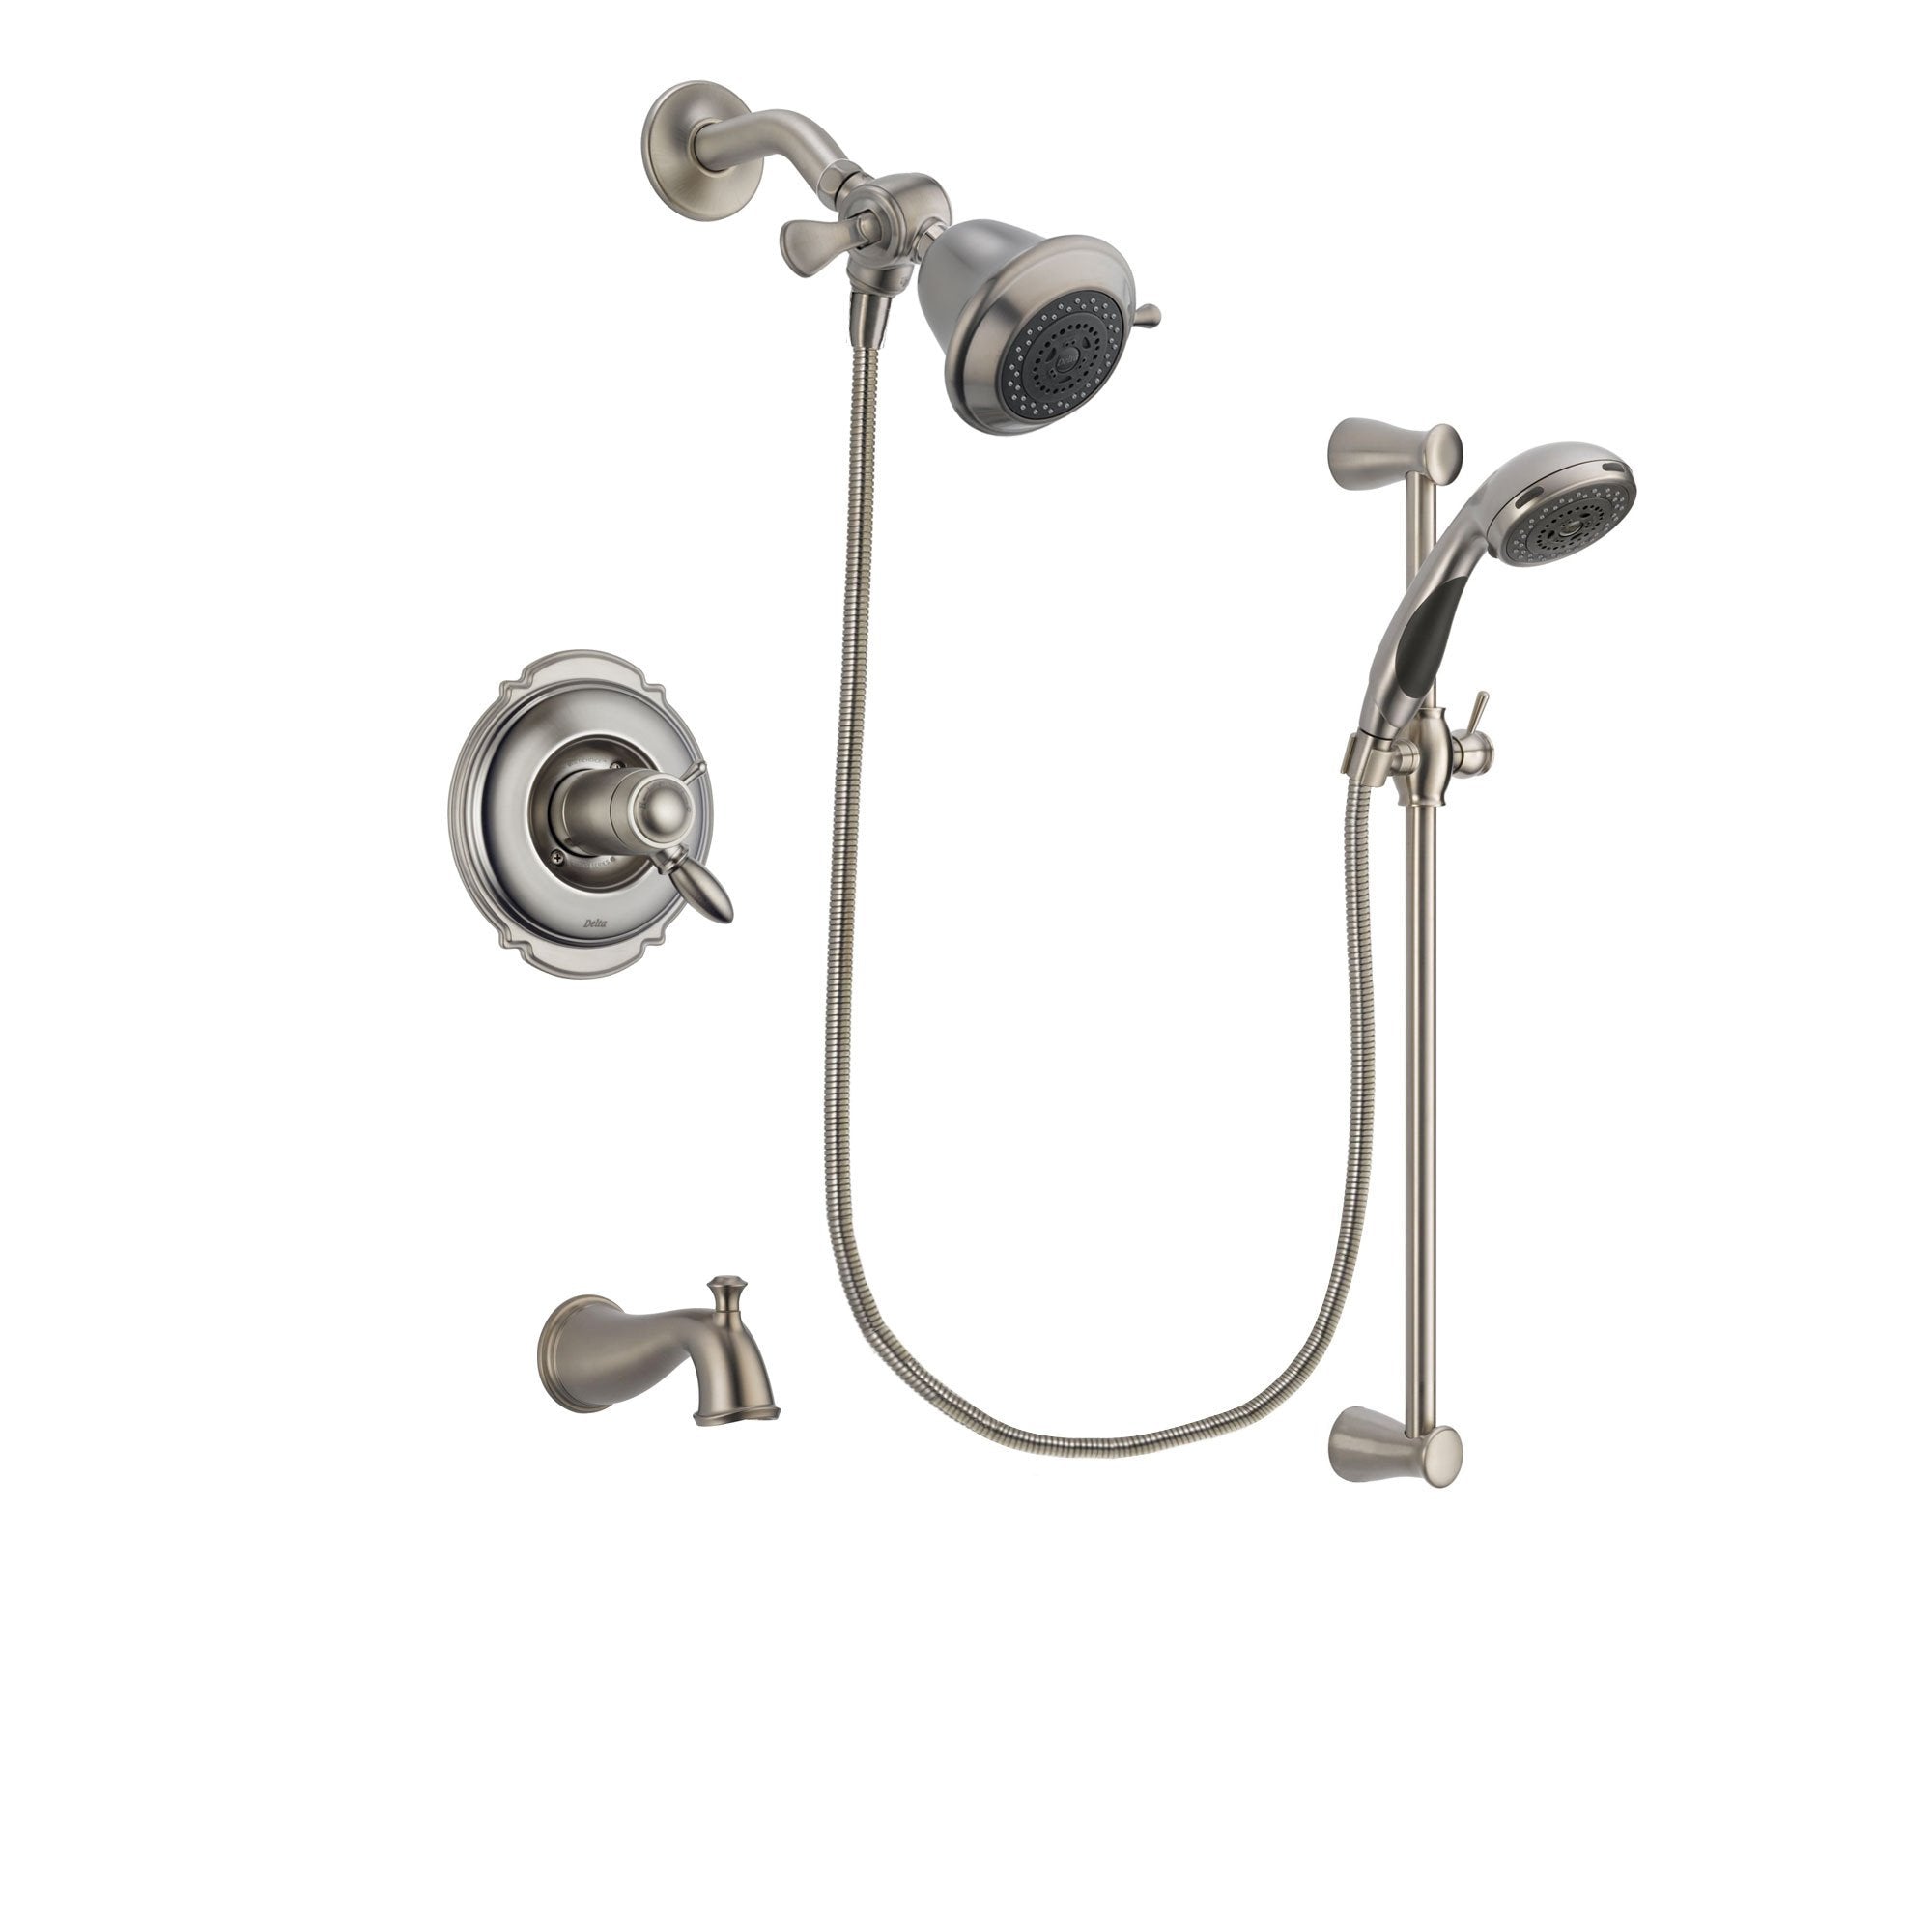 Delta Victorian Stainless Steel Finish Thermostatic Tub and Shower Faucet System Package with Shower Head and Handheld Shower Spray with Slide Bar Includes Rough-in Valve and Tub Spout DSP1515V